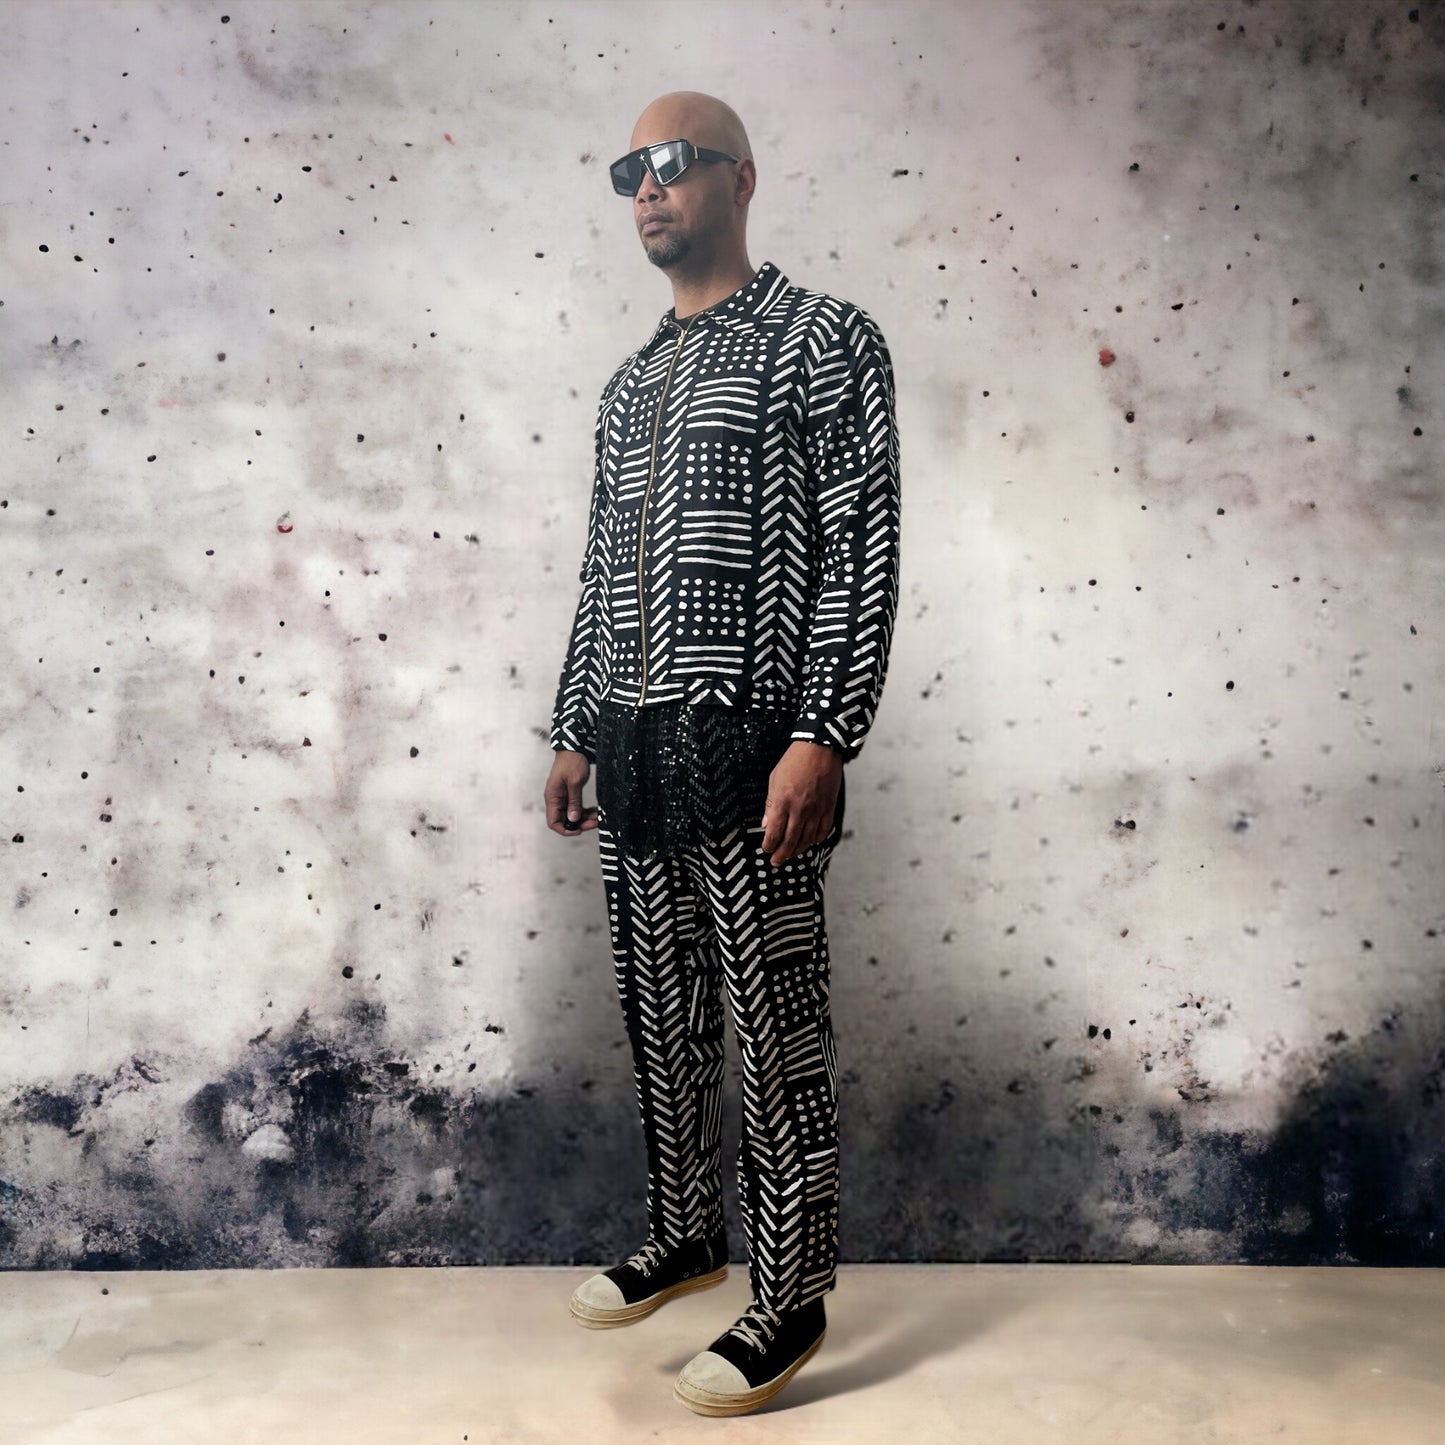 Tribal Printed Coached Jacket and Pant set Black And White African Cotton Prints